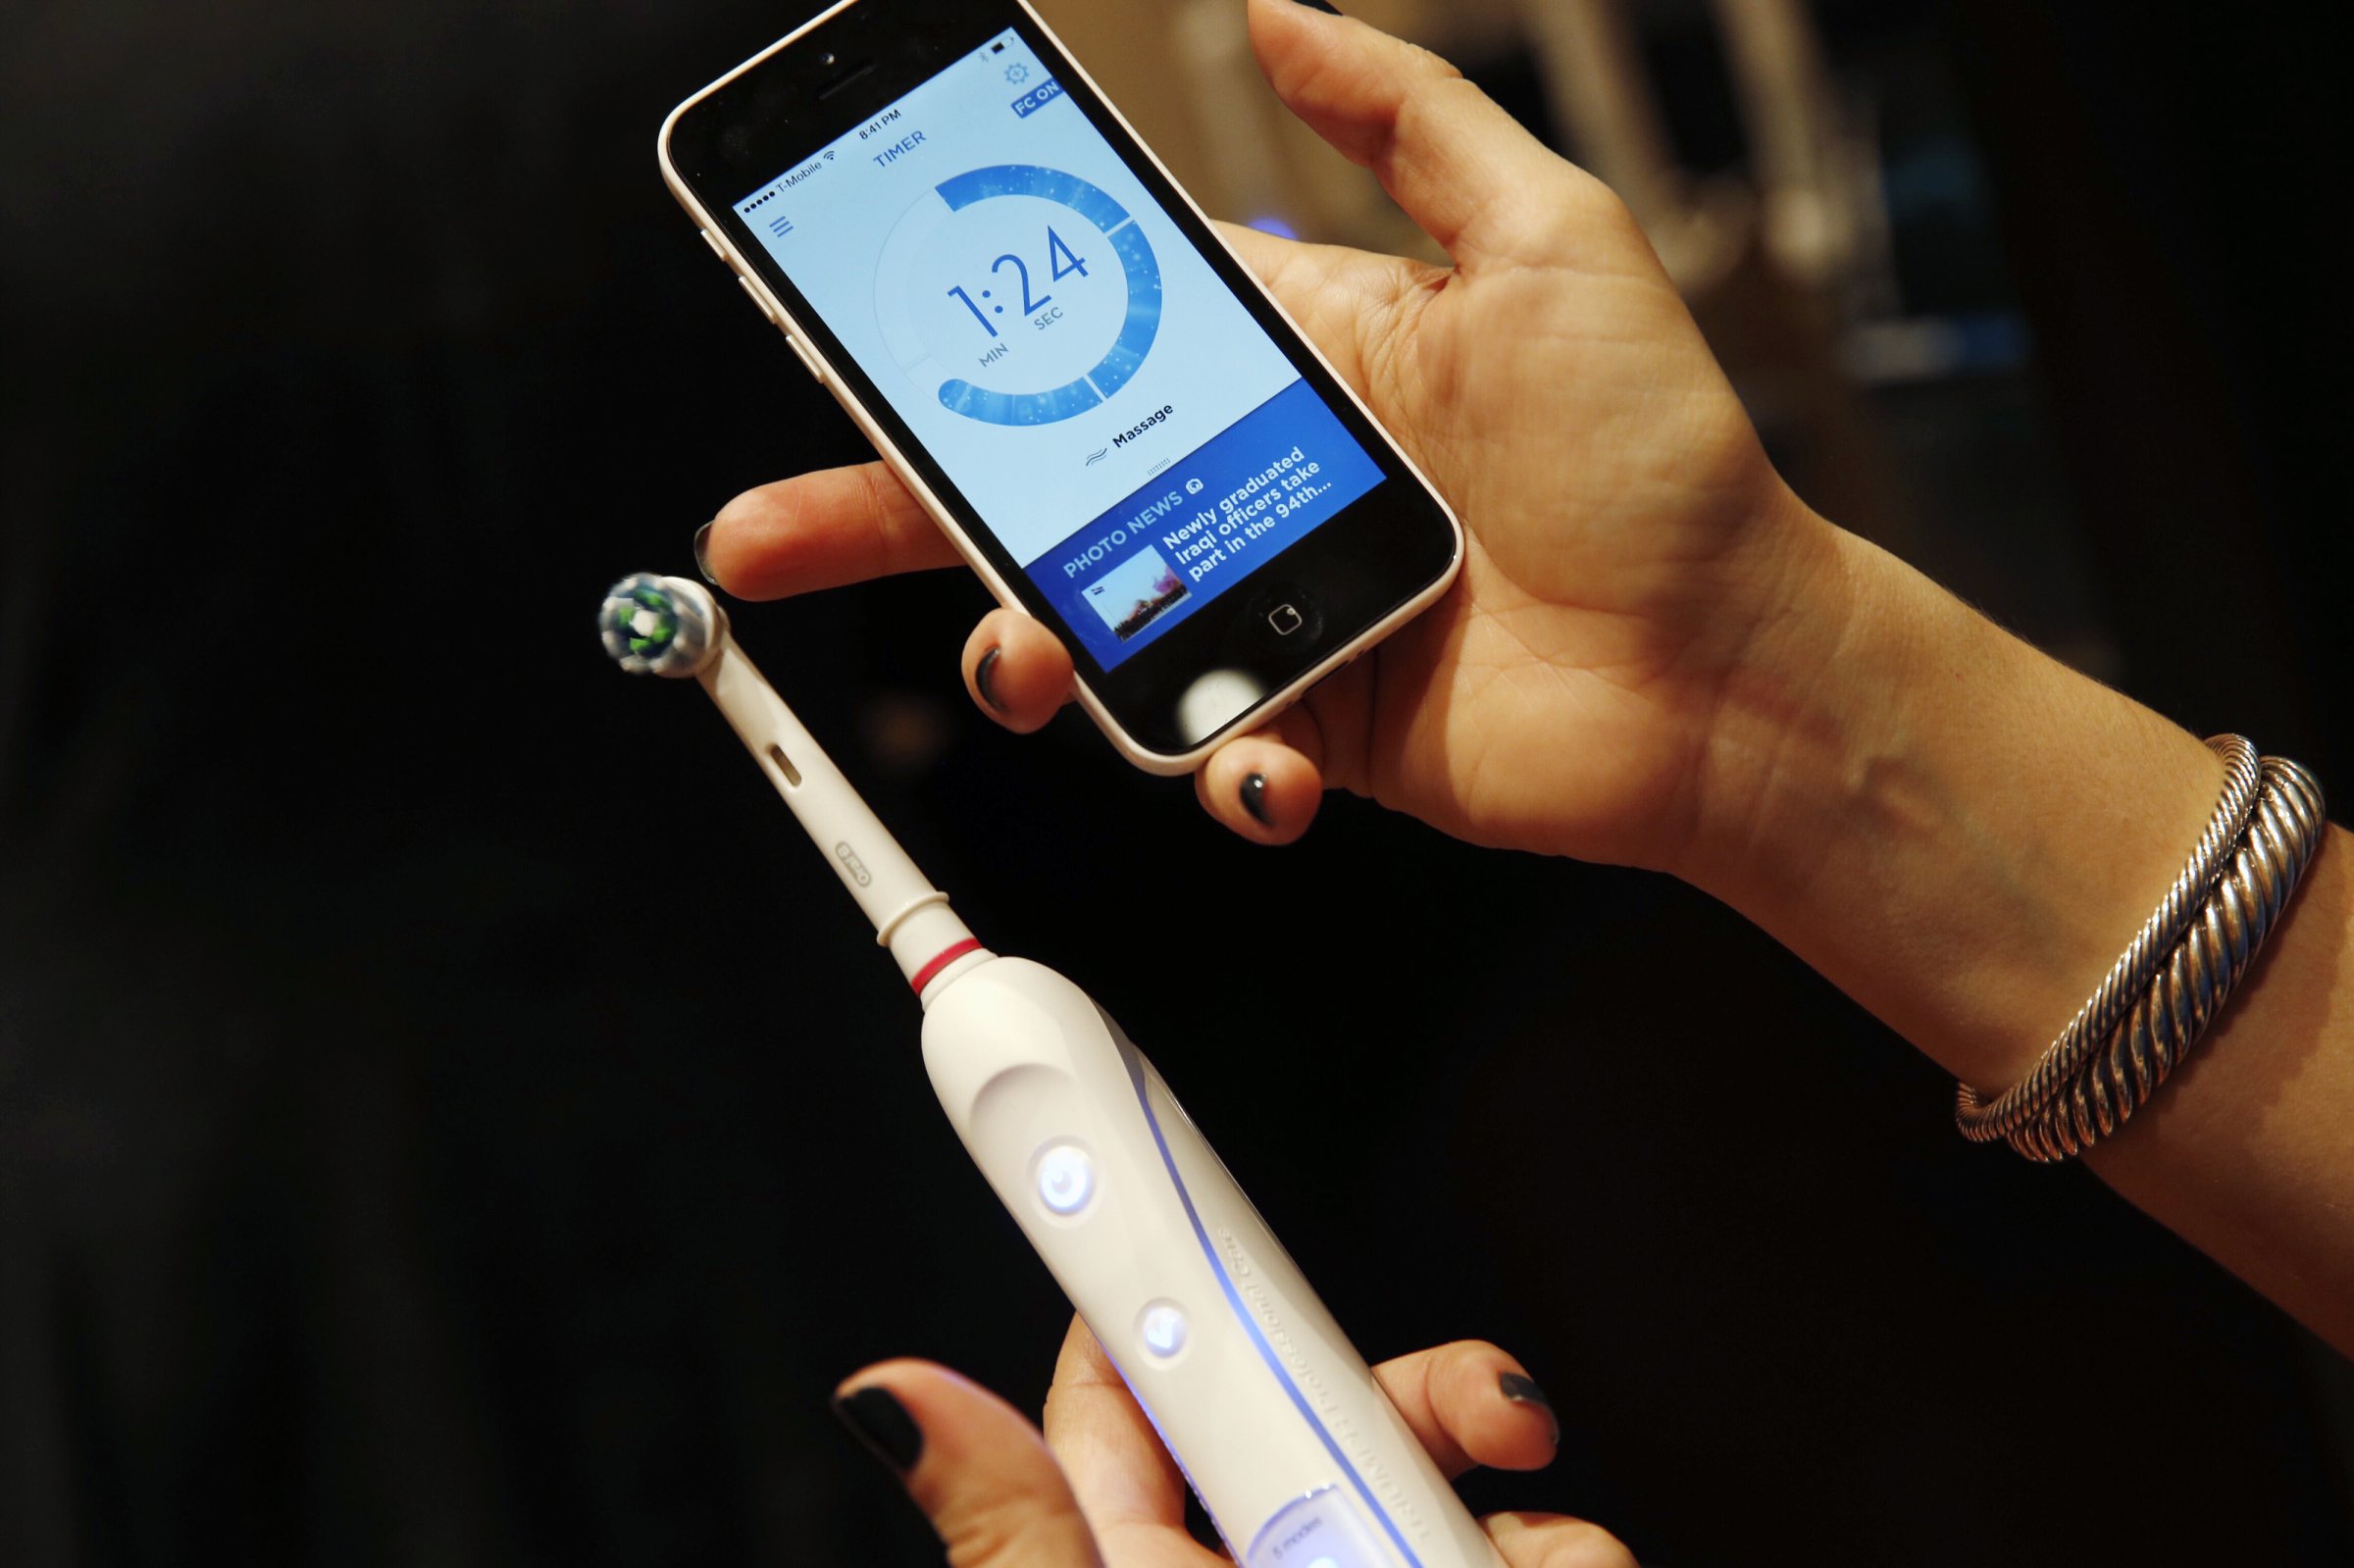 An attendee holds an Procter & Gamble Co. Oral-B SmartSeries electric toothbrush alongside an Apple Inc. iPhone during the 2015 Consumer Electronics Show (CES) in Las Vegas, Nevada, U.S., on Tuesday, Jan. 6, 2015.